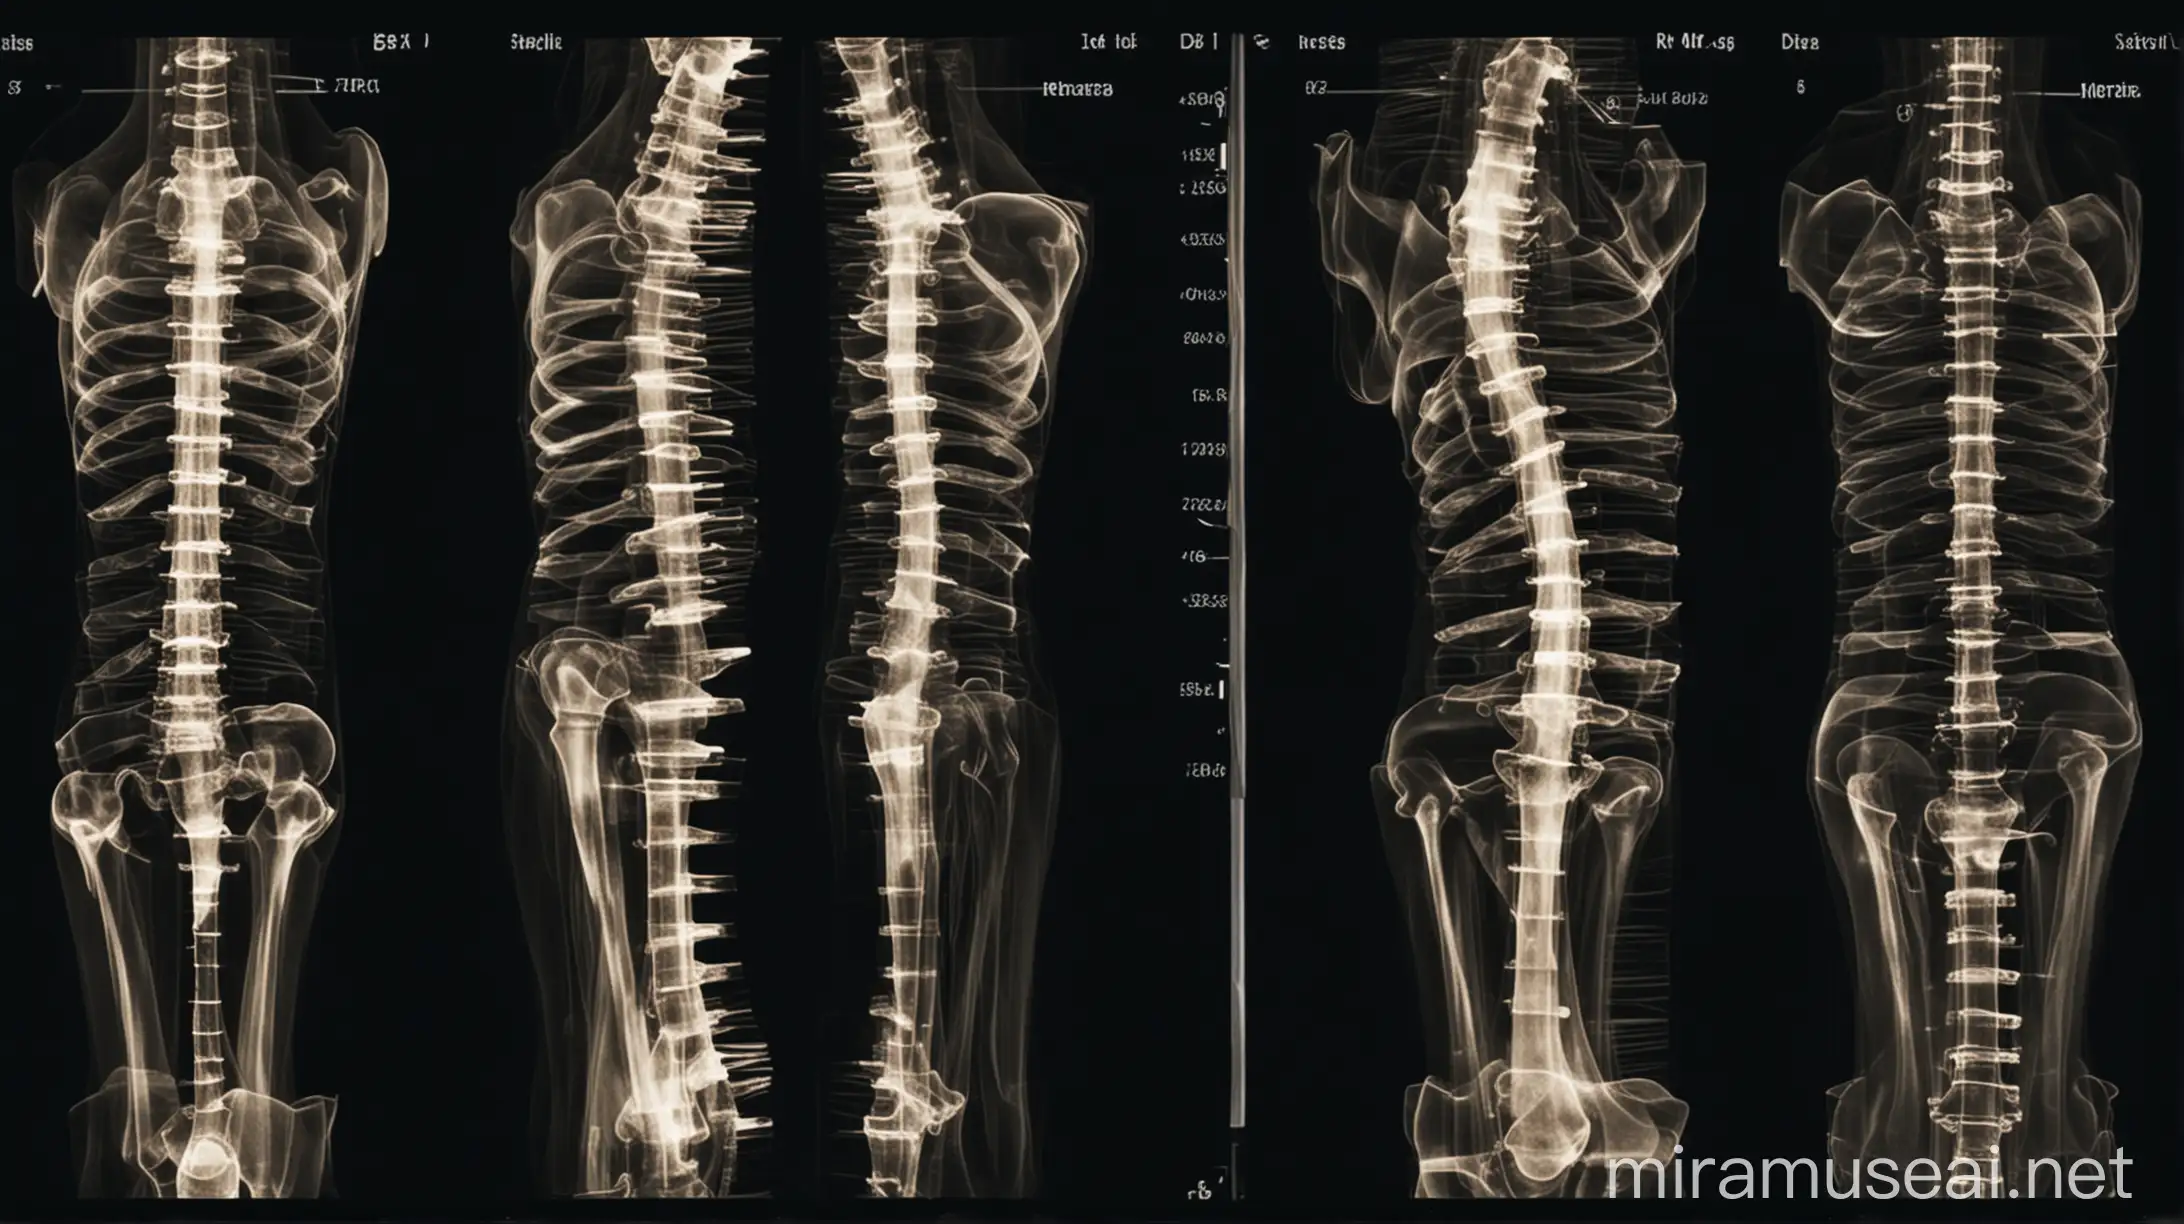 A simple, technologic and interesting image of medical radiographic imaging of human spine to see alignment.